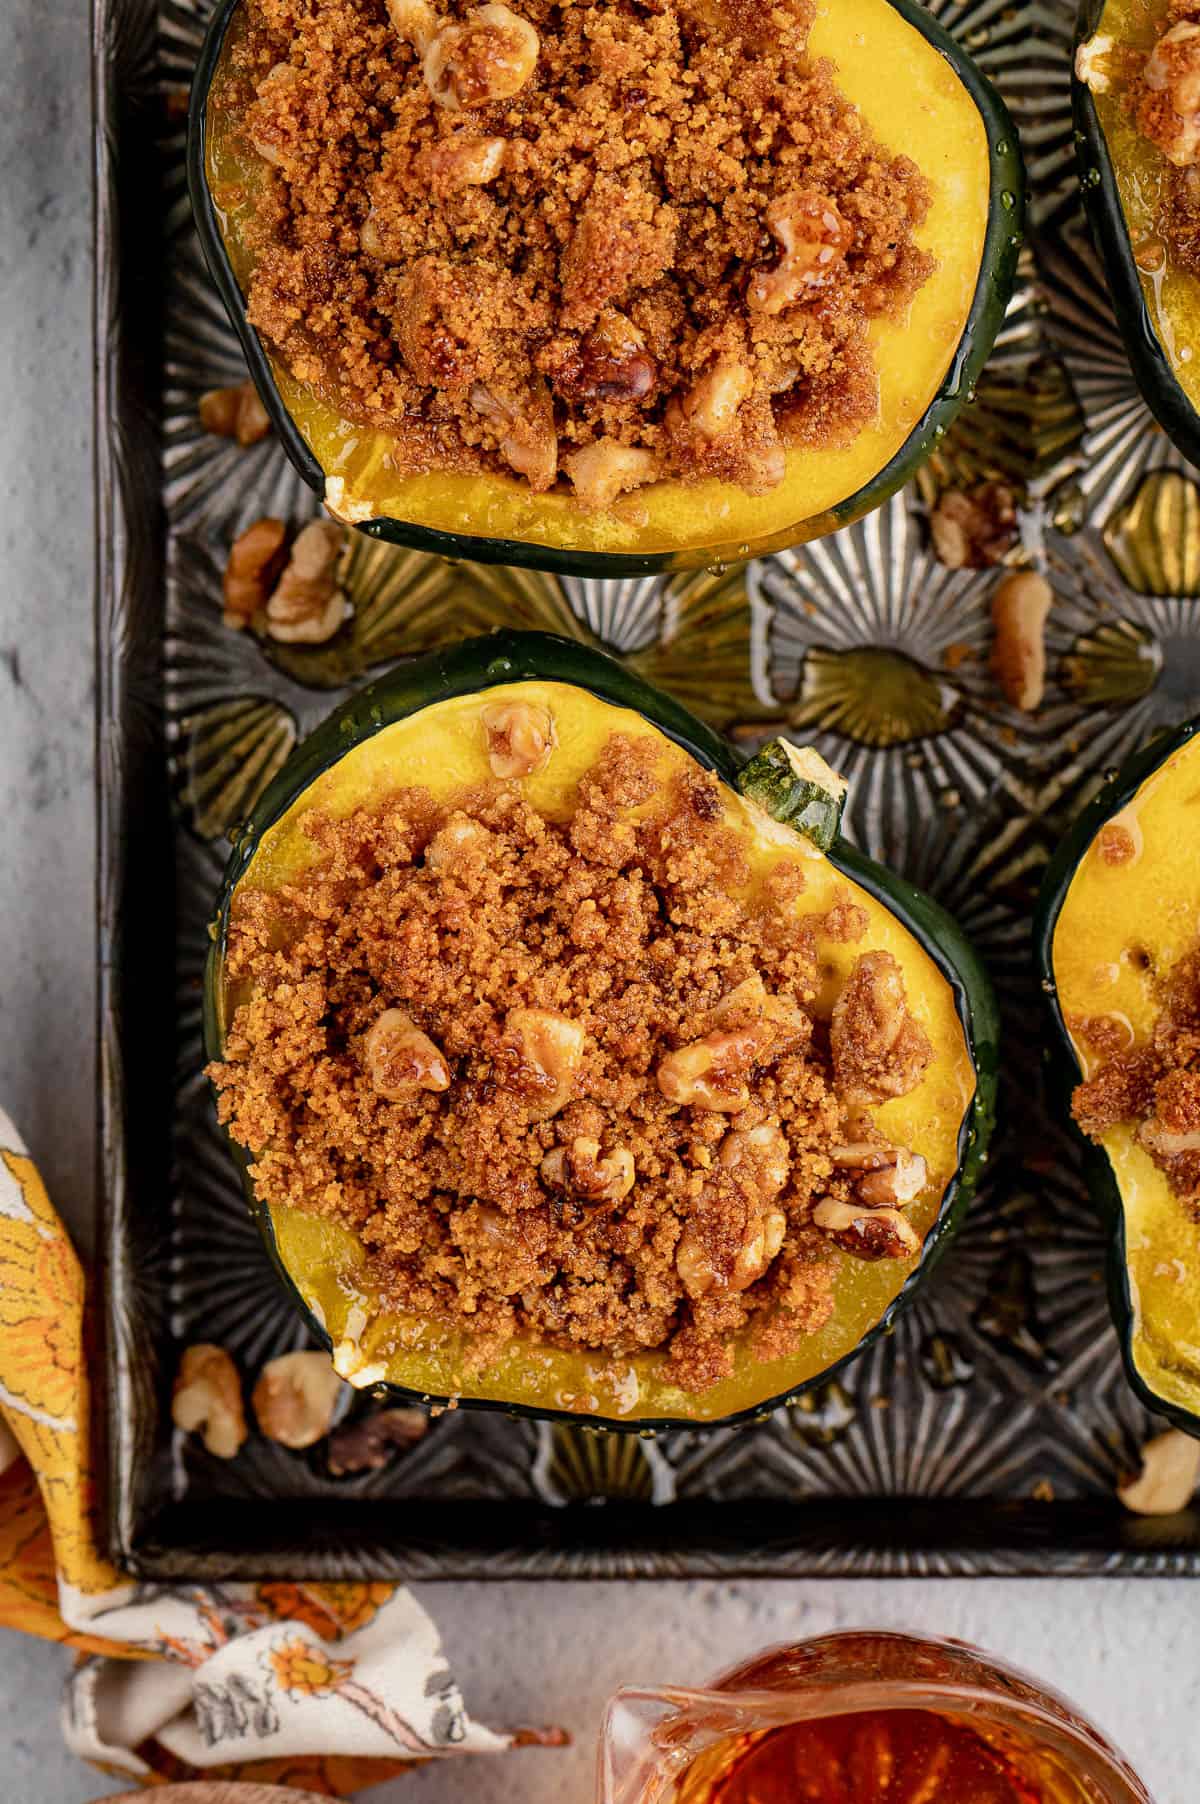 Baked acorn squash stuffed with a brown sugar and graham cracker crumble on a baking sheet.